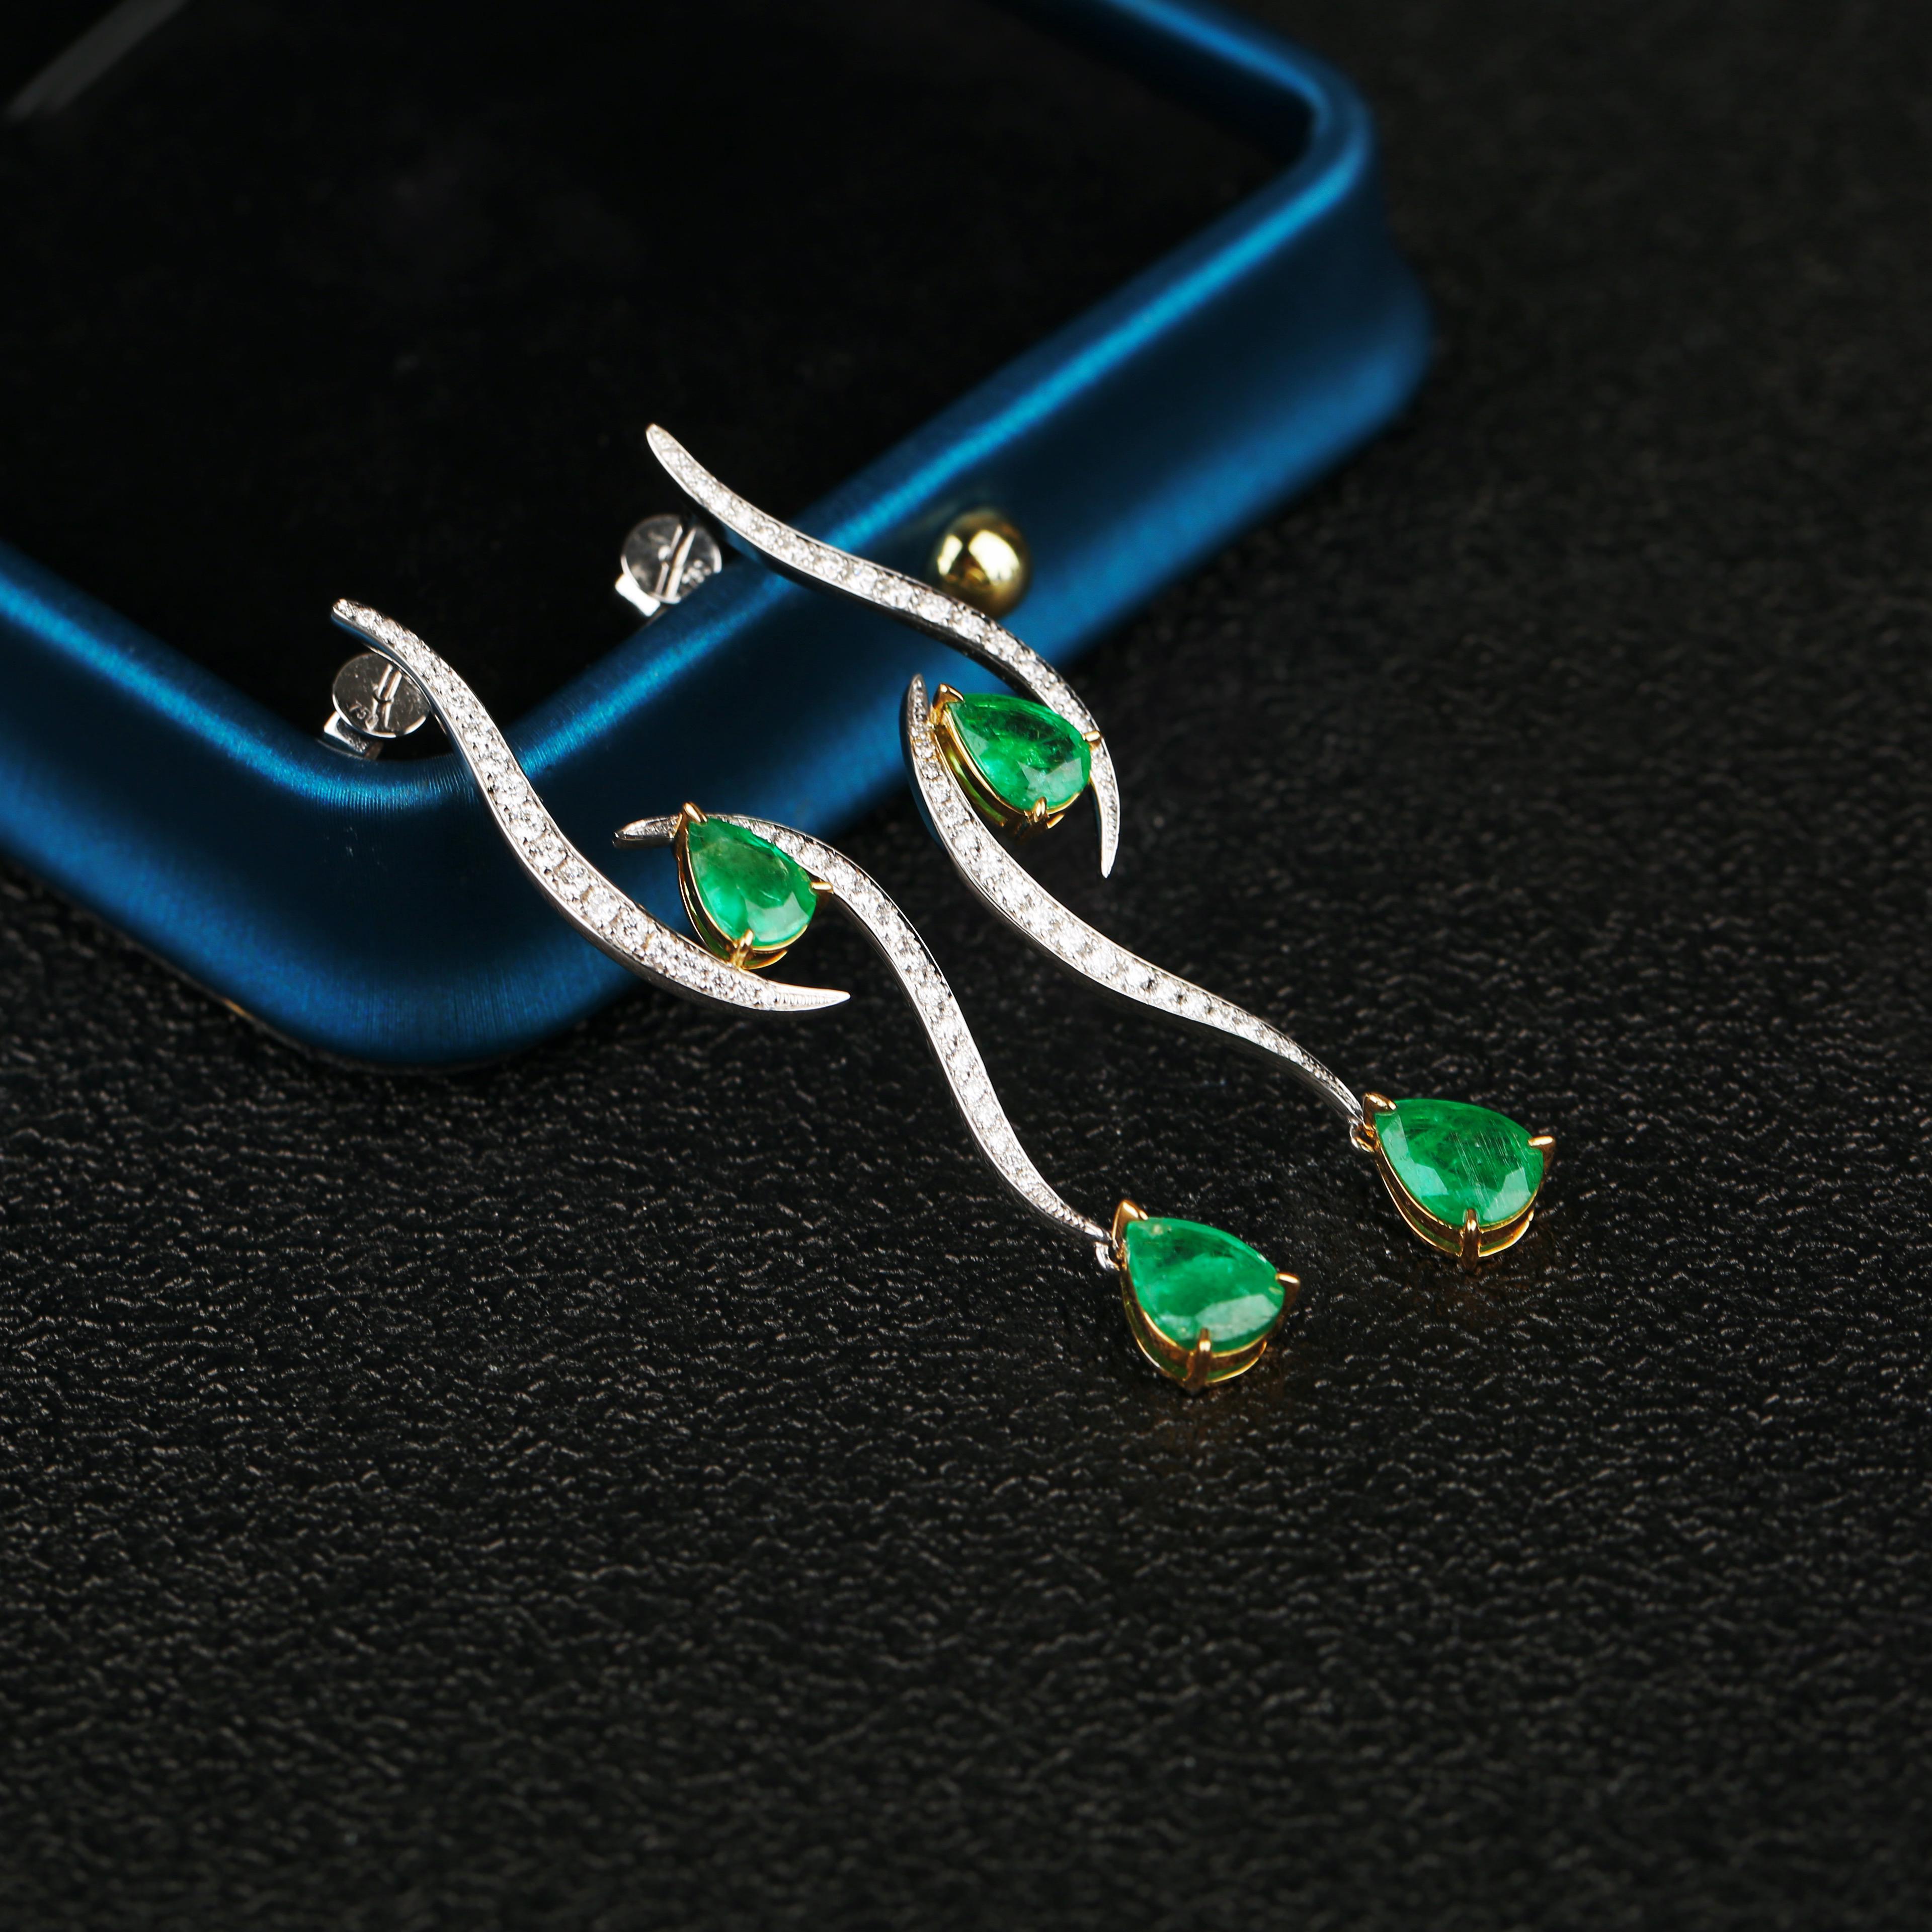 The pair of earring is consist of 
4 Pieces of Pear shape Brilliant cut Vivid Green Emerald with the total weight of 3.1 ct 
Total natural diamond weight is 0.656 ct , The Colour of the Diamond is Approximately E/F with VS Clarity

The majority of